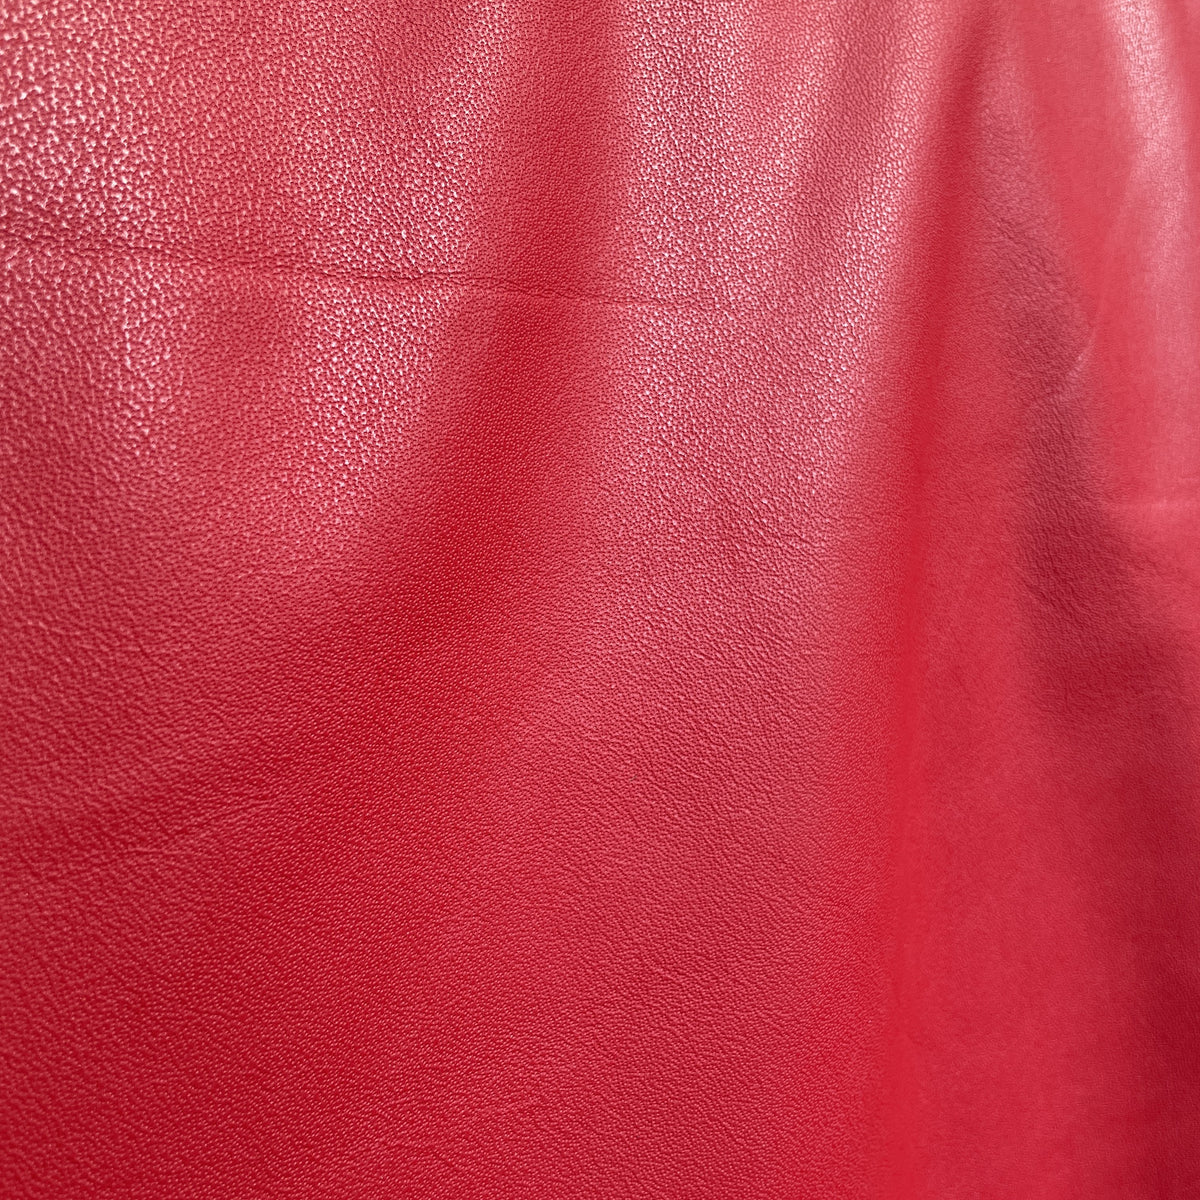 Milano Garment Cow Sides | Red | 0.6 mm | 25 sq.ft | From $230 ea.